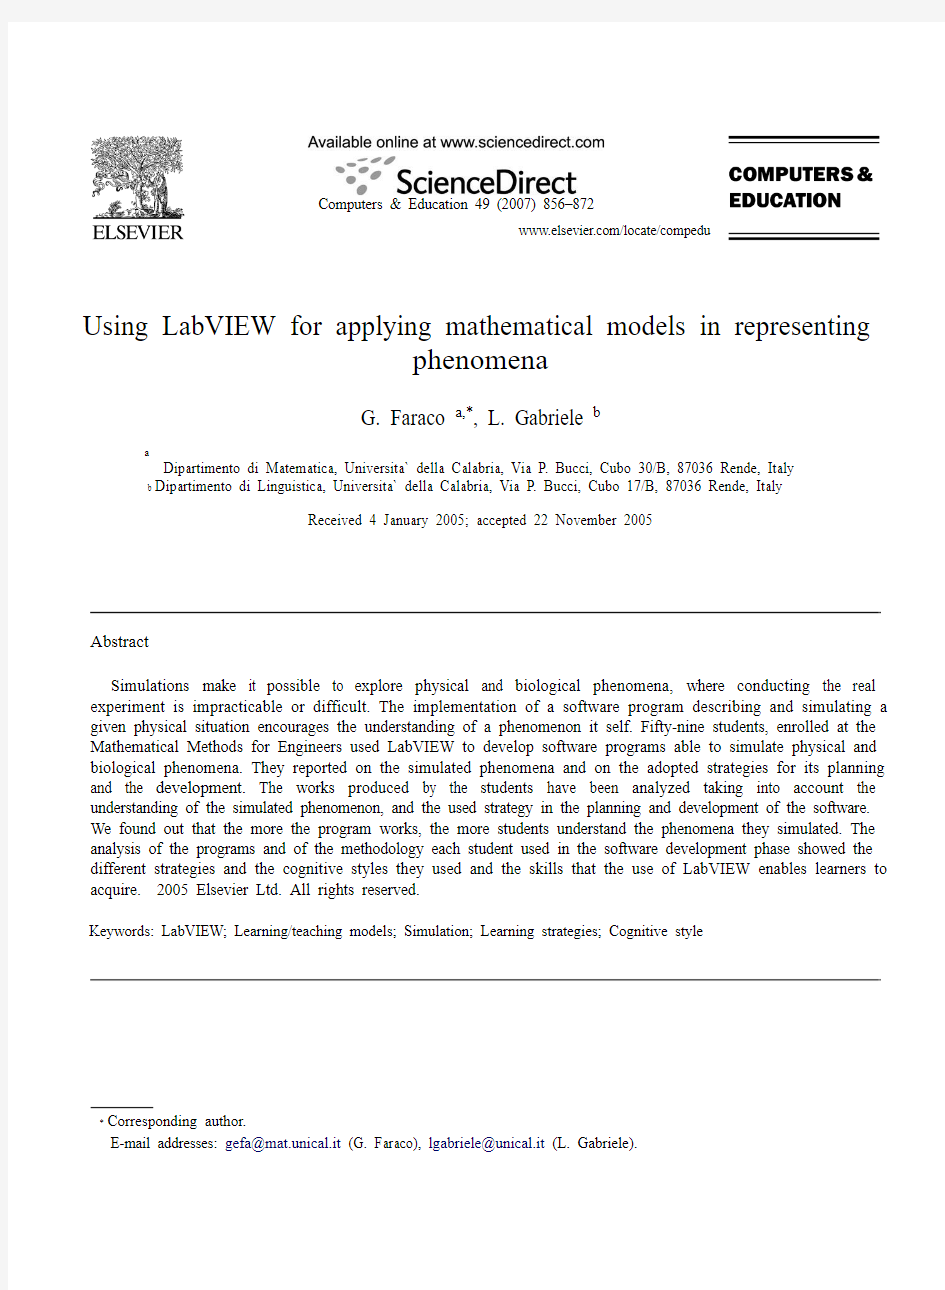 33 2007Using LabVIEW for applying mathematical models in representing phenomena